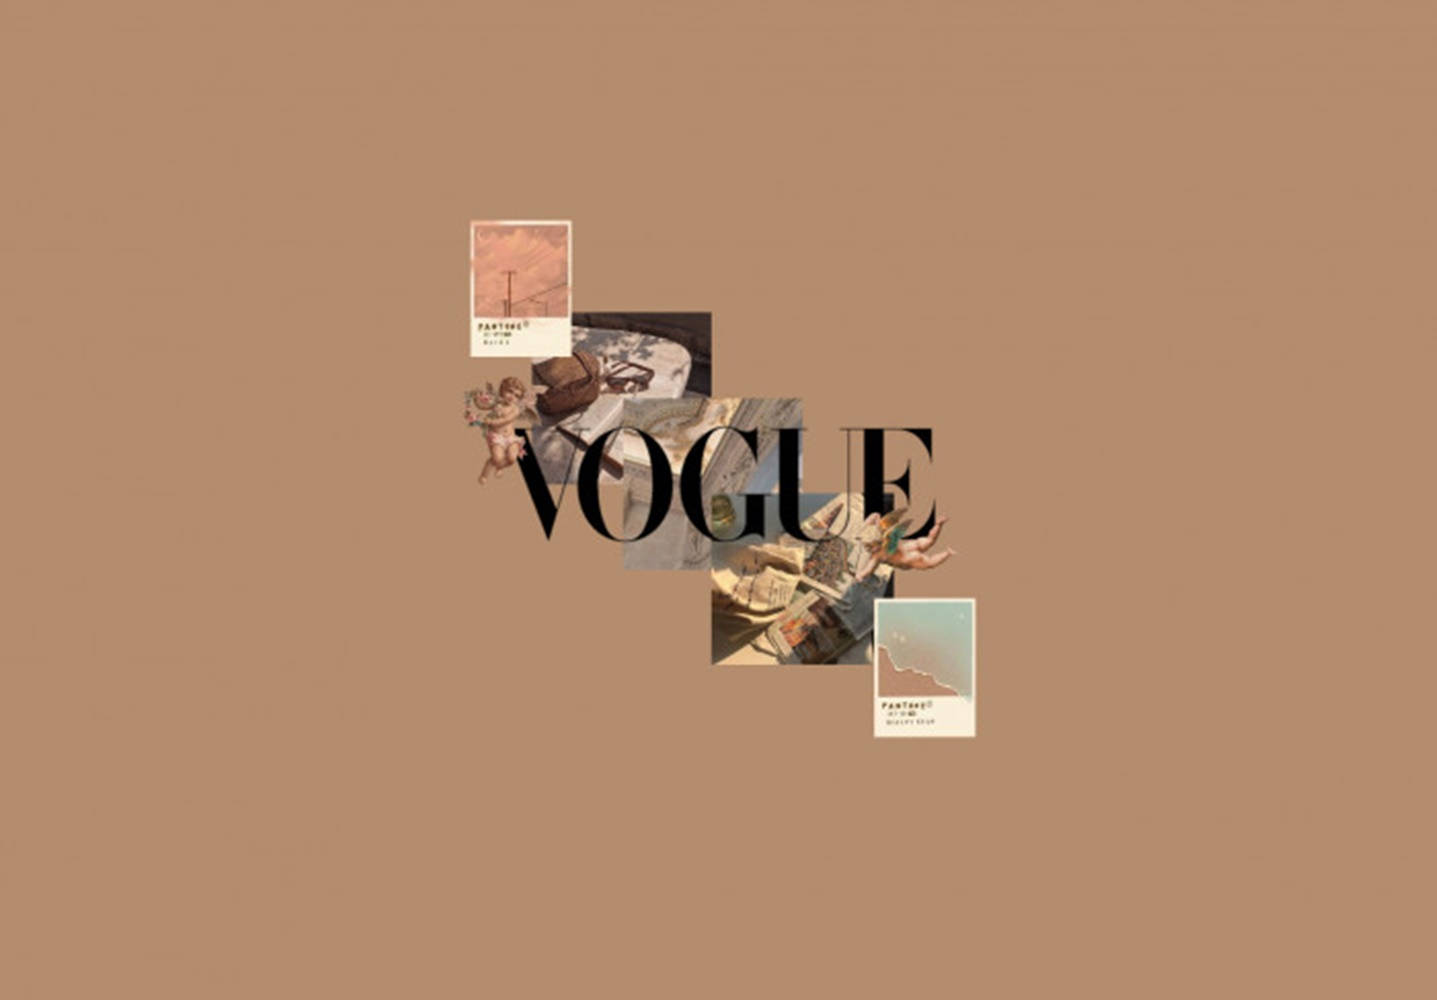 Brown Aesthetic Vogue Art Laptop Background